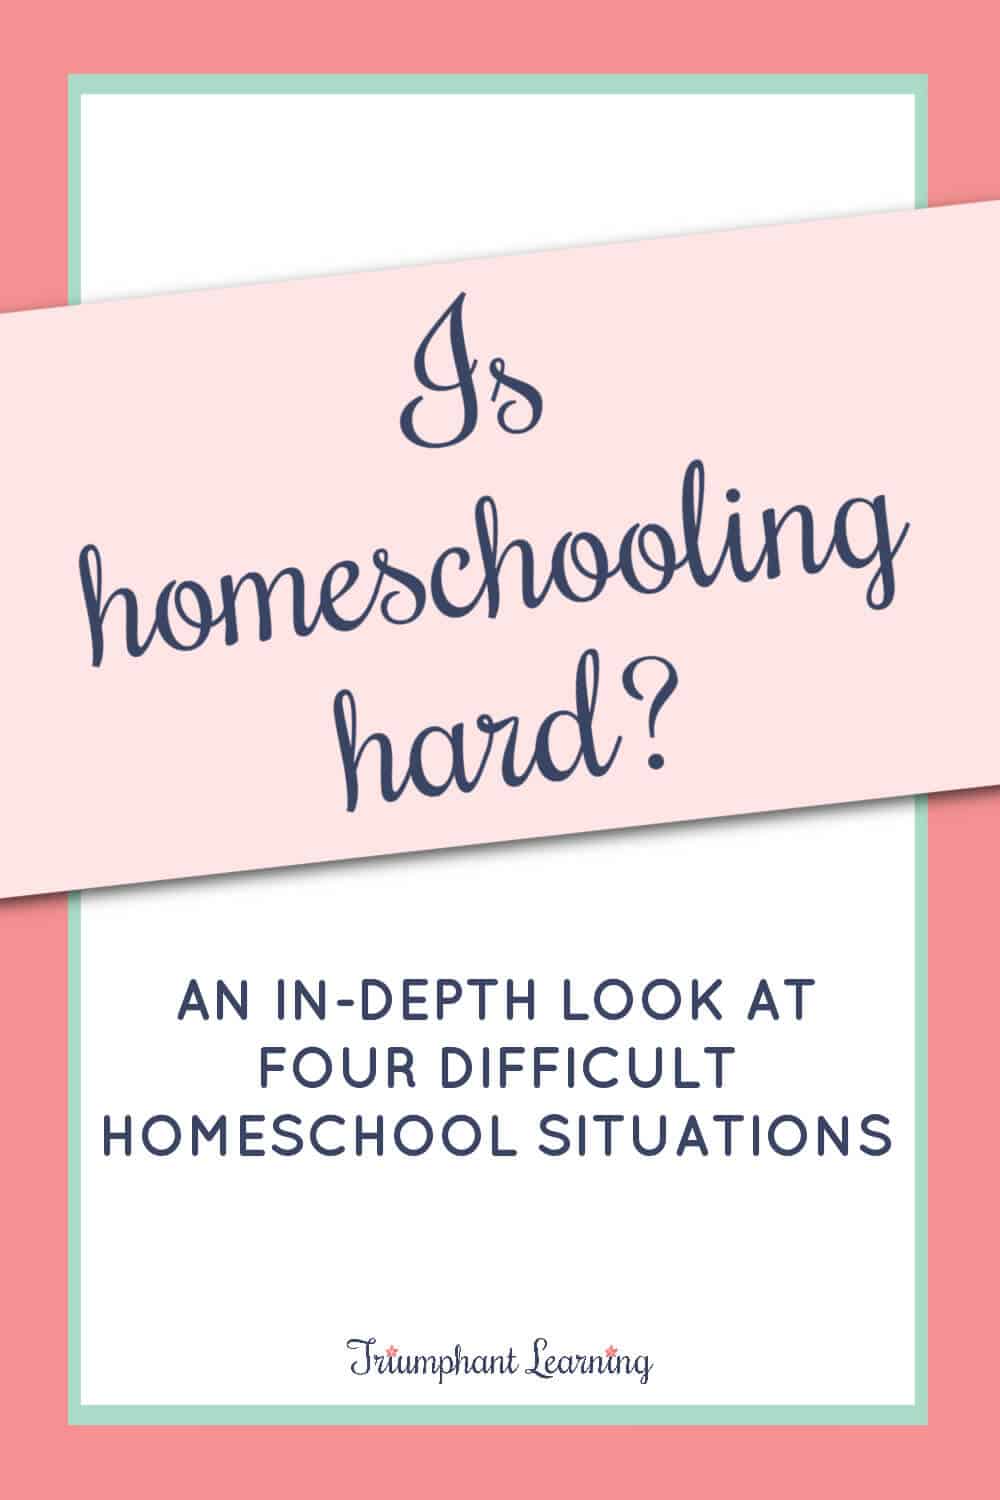 Is homeschooling hard? Yes, but there are so many benefits of homeschooling too! Learn how to overcome four difficult homeschool situations. via @TriLearning